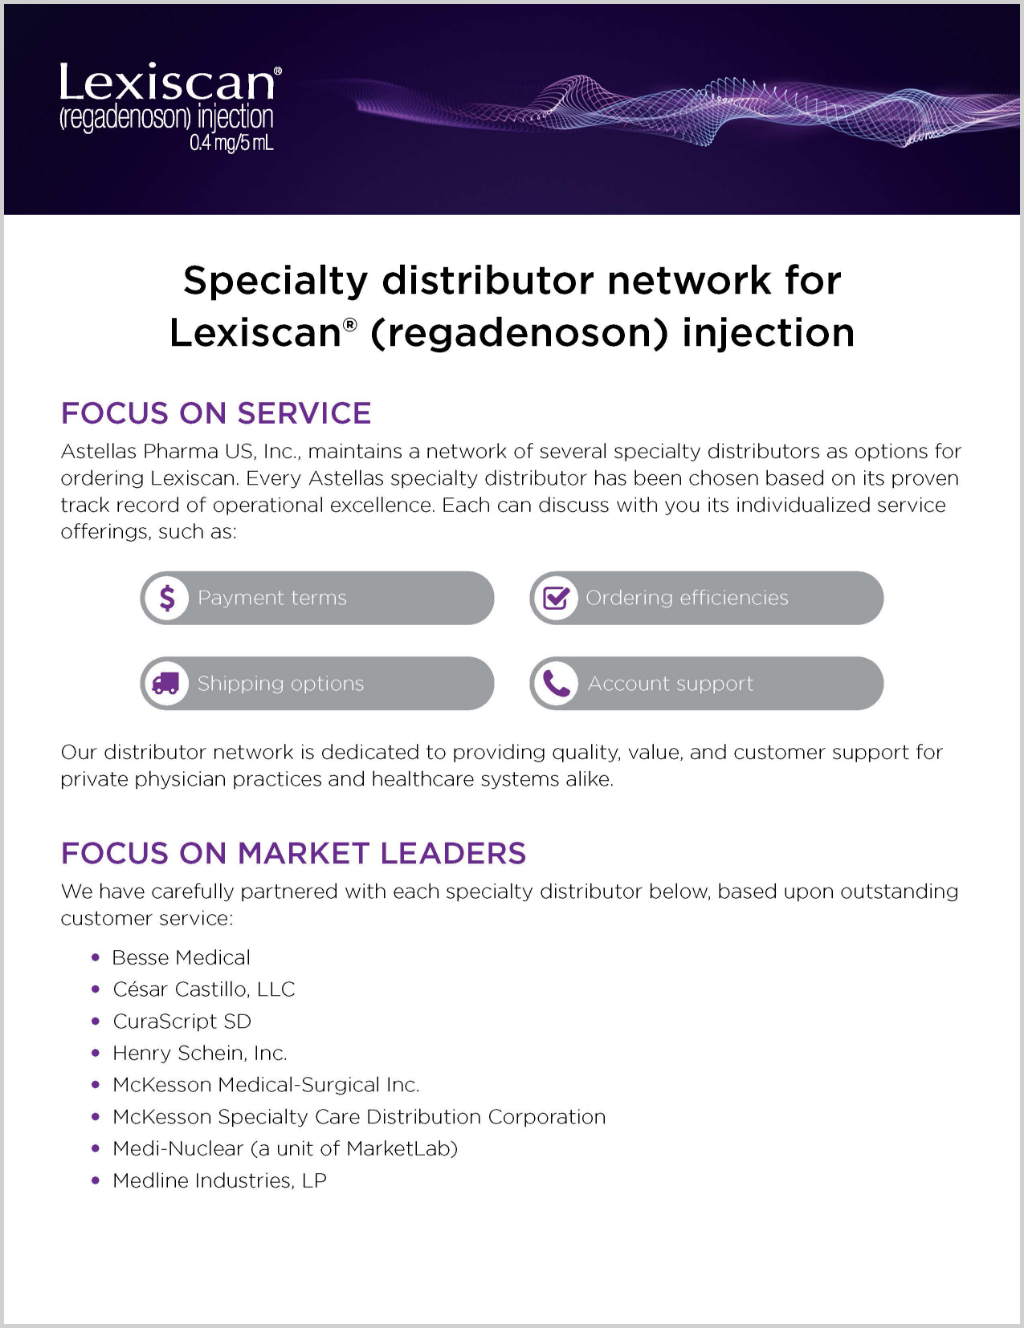 Download the Lexiscan specialty distributor overview fact sheet